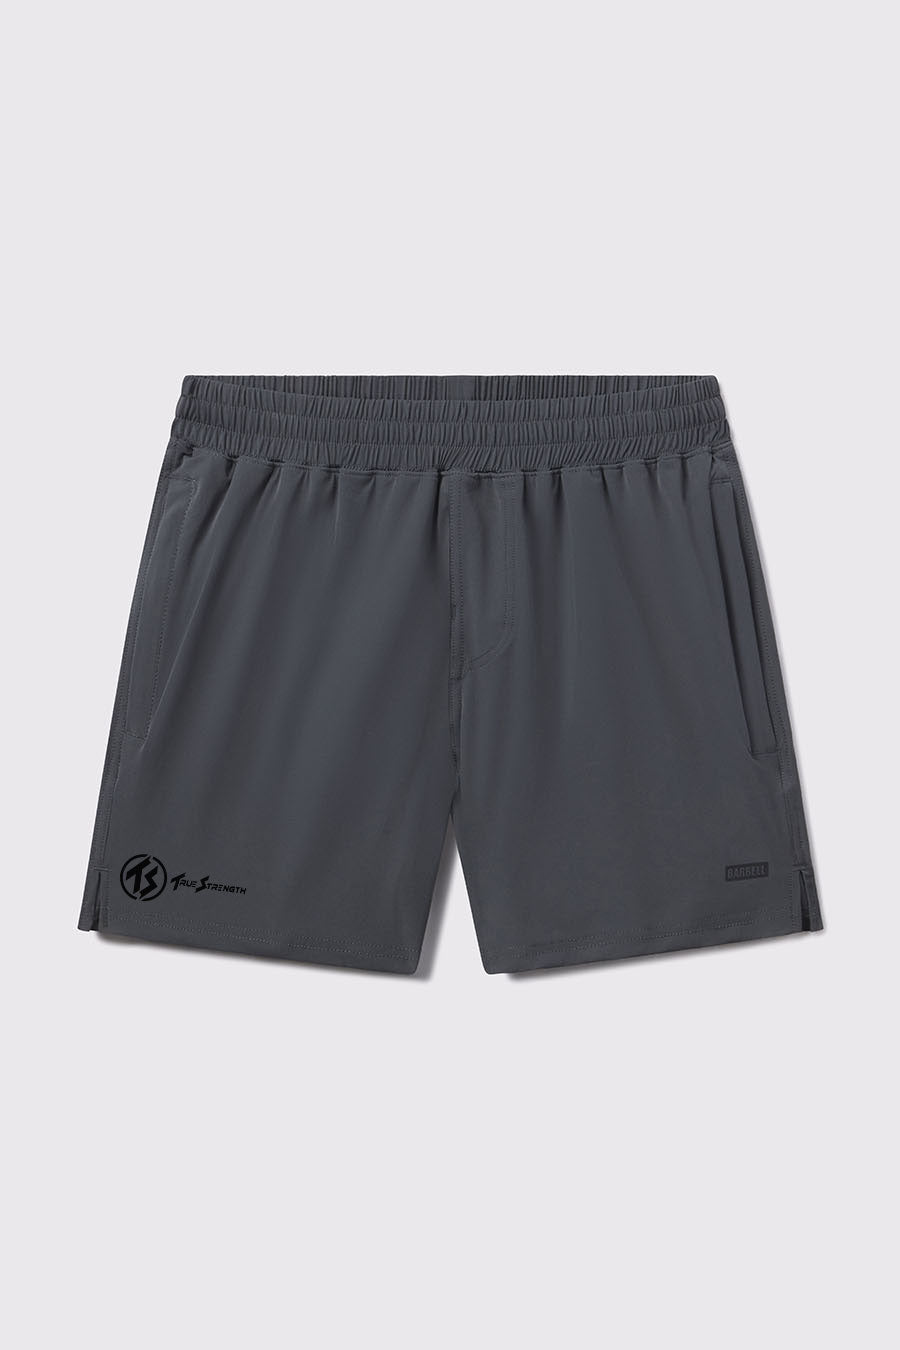 Shuck Ranger Short - Charcoal - photo from front flat lay #color_charcoal